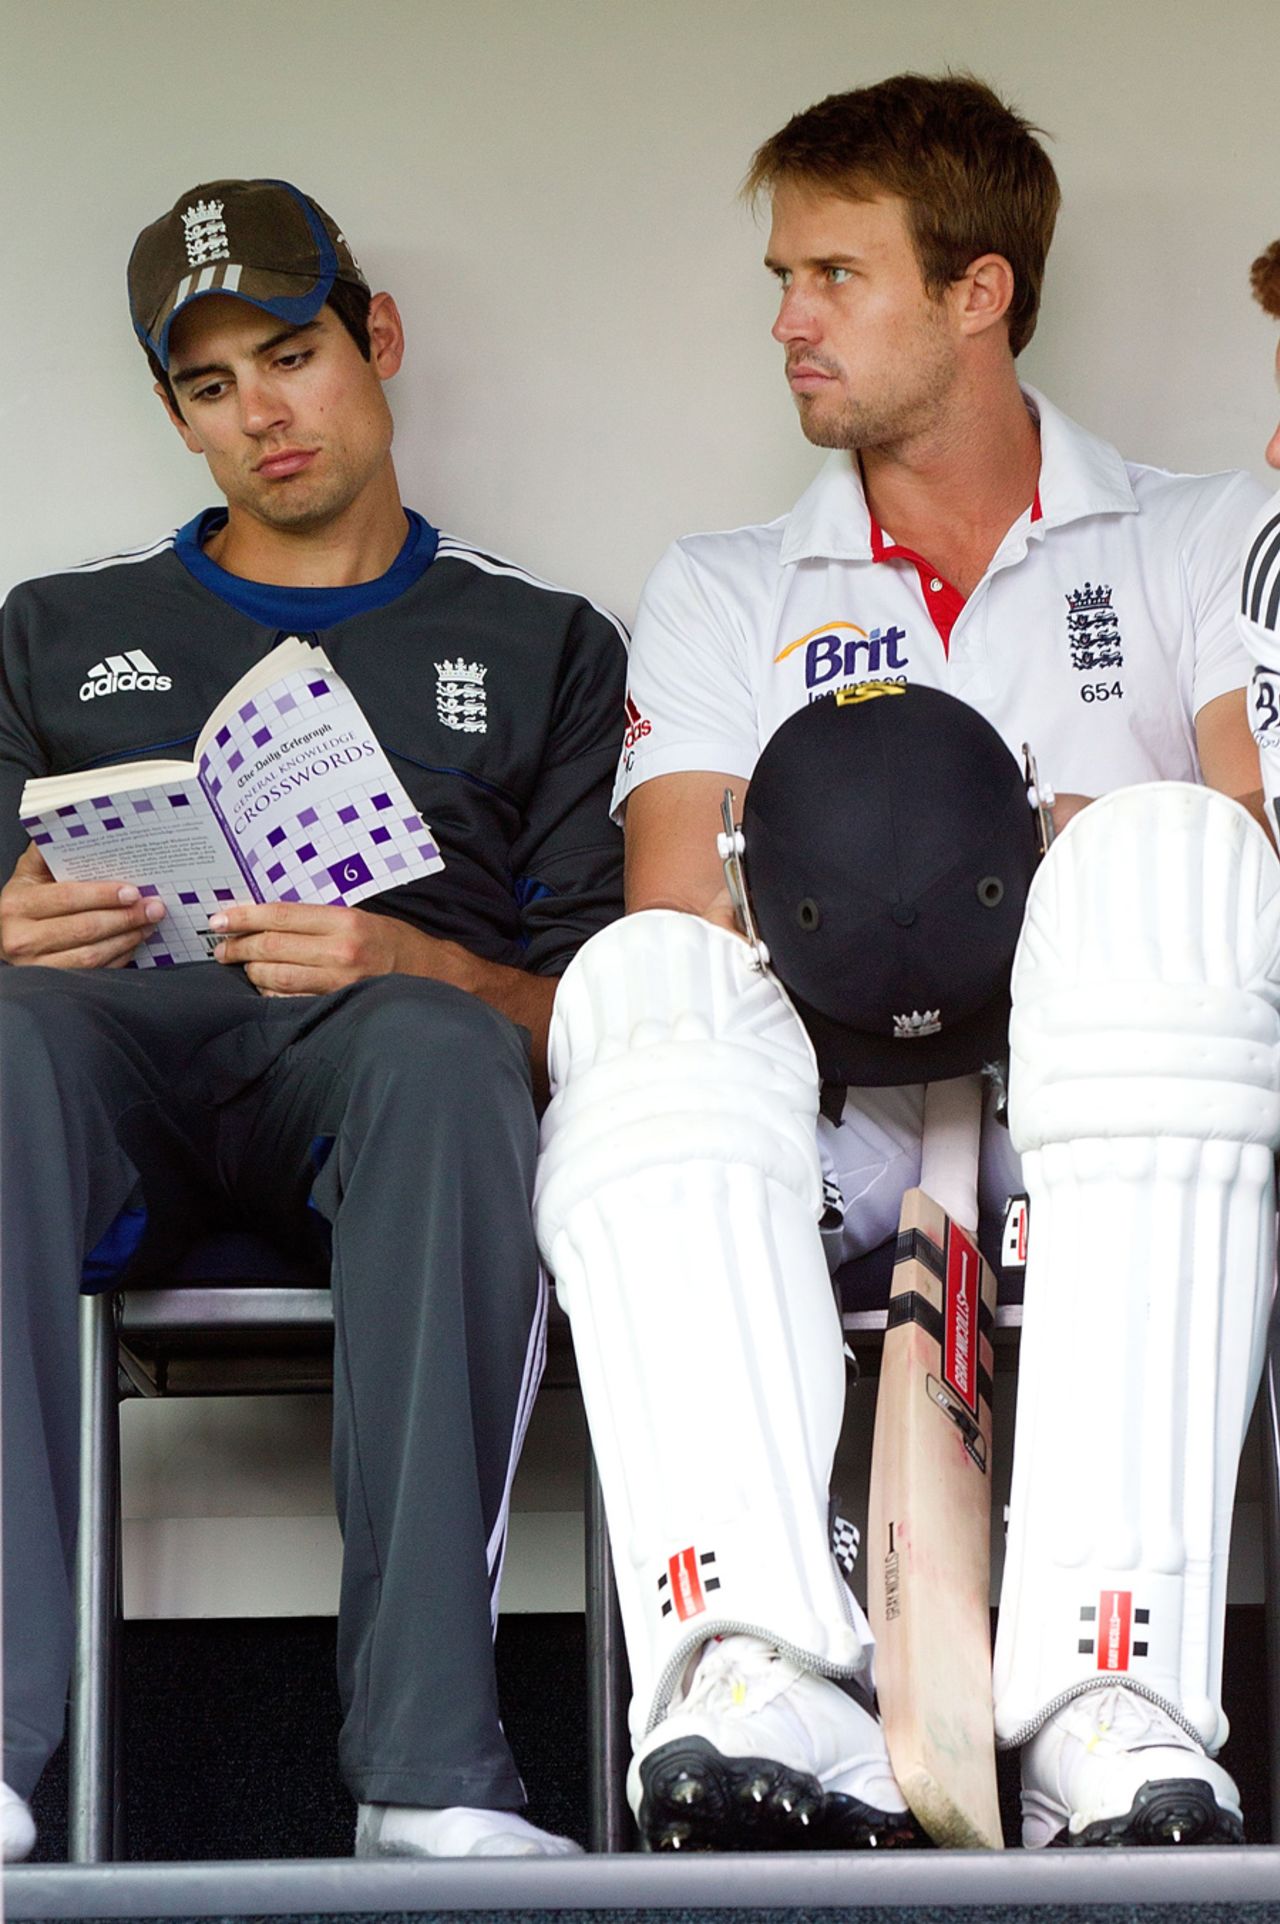 Alastair Cook reads a book on crosswords while Nick Compton waits for the start of play, New Zealand v England, 1st Test, Dunedin, 5th day, March 10, 2013